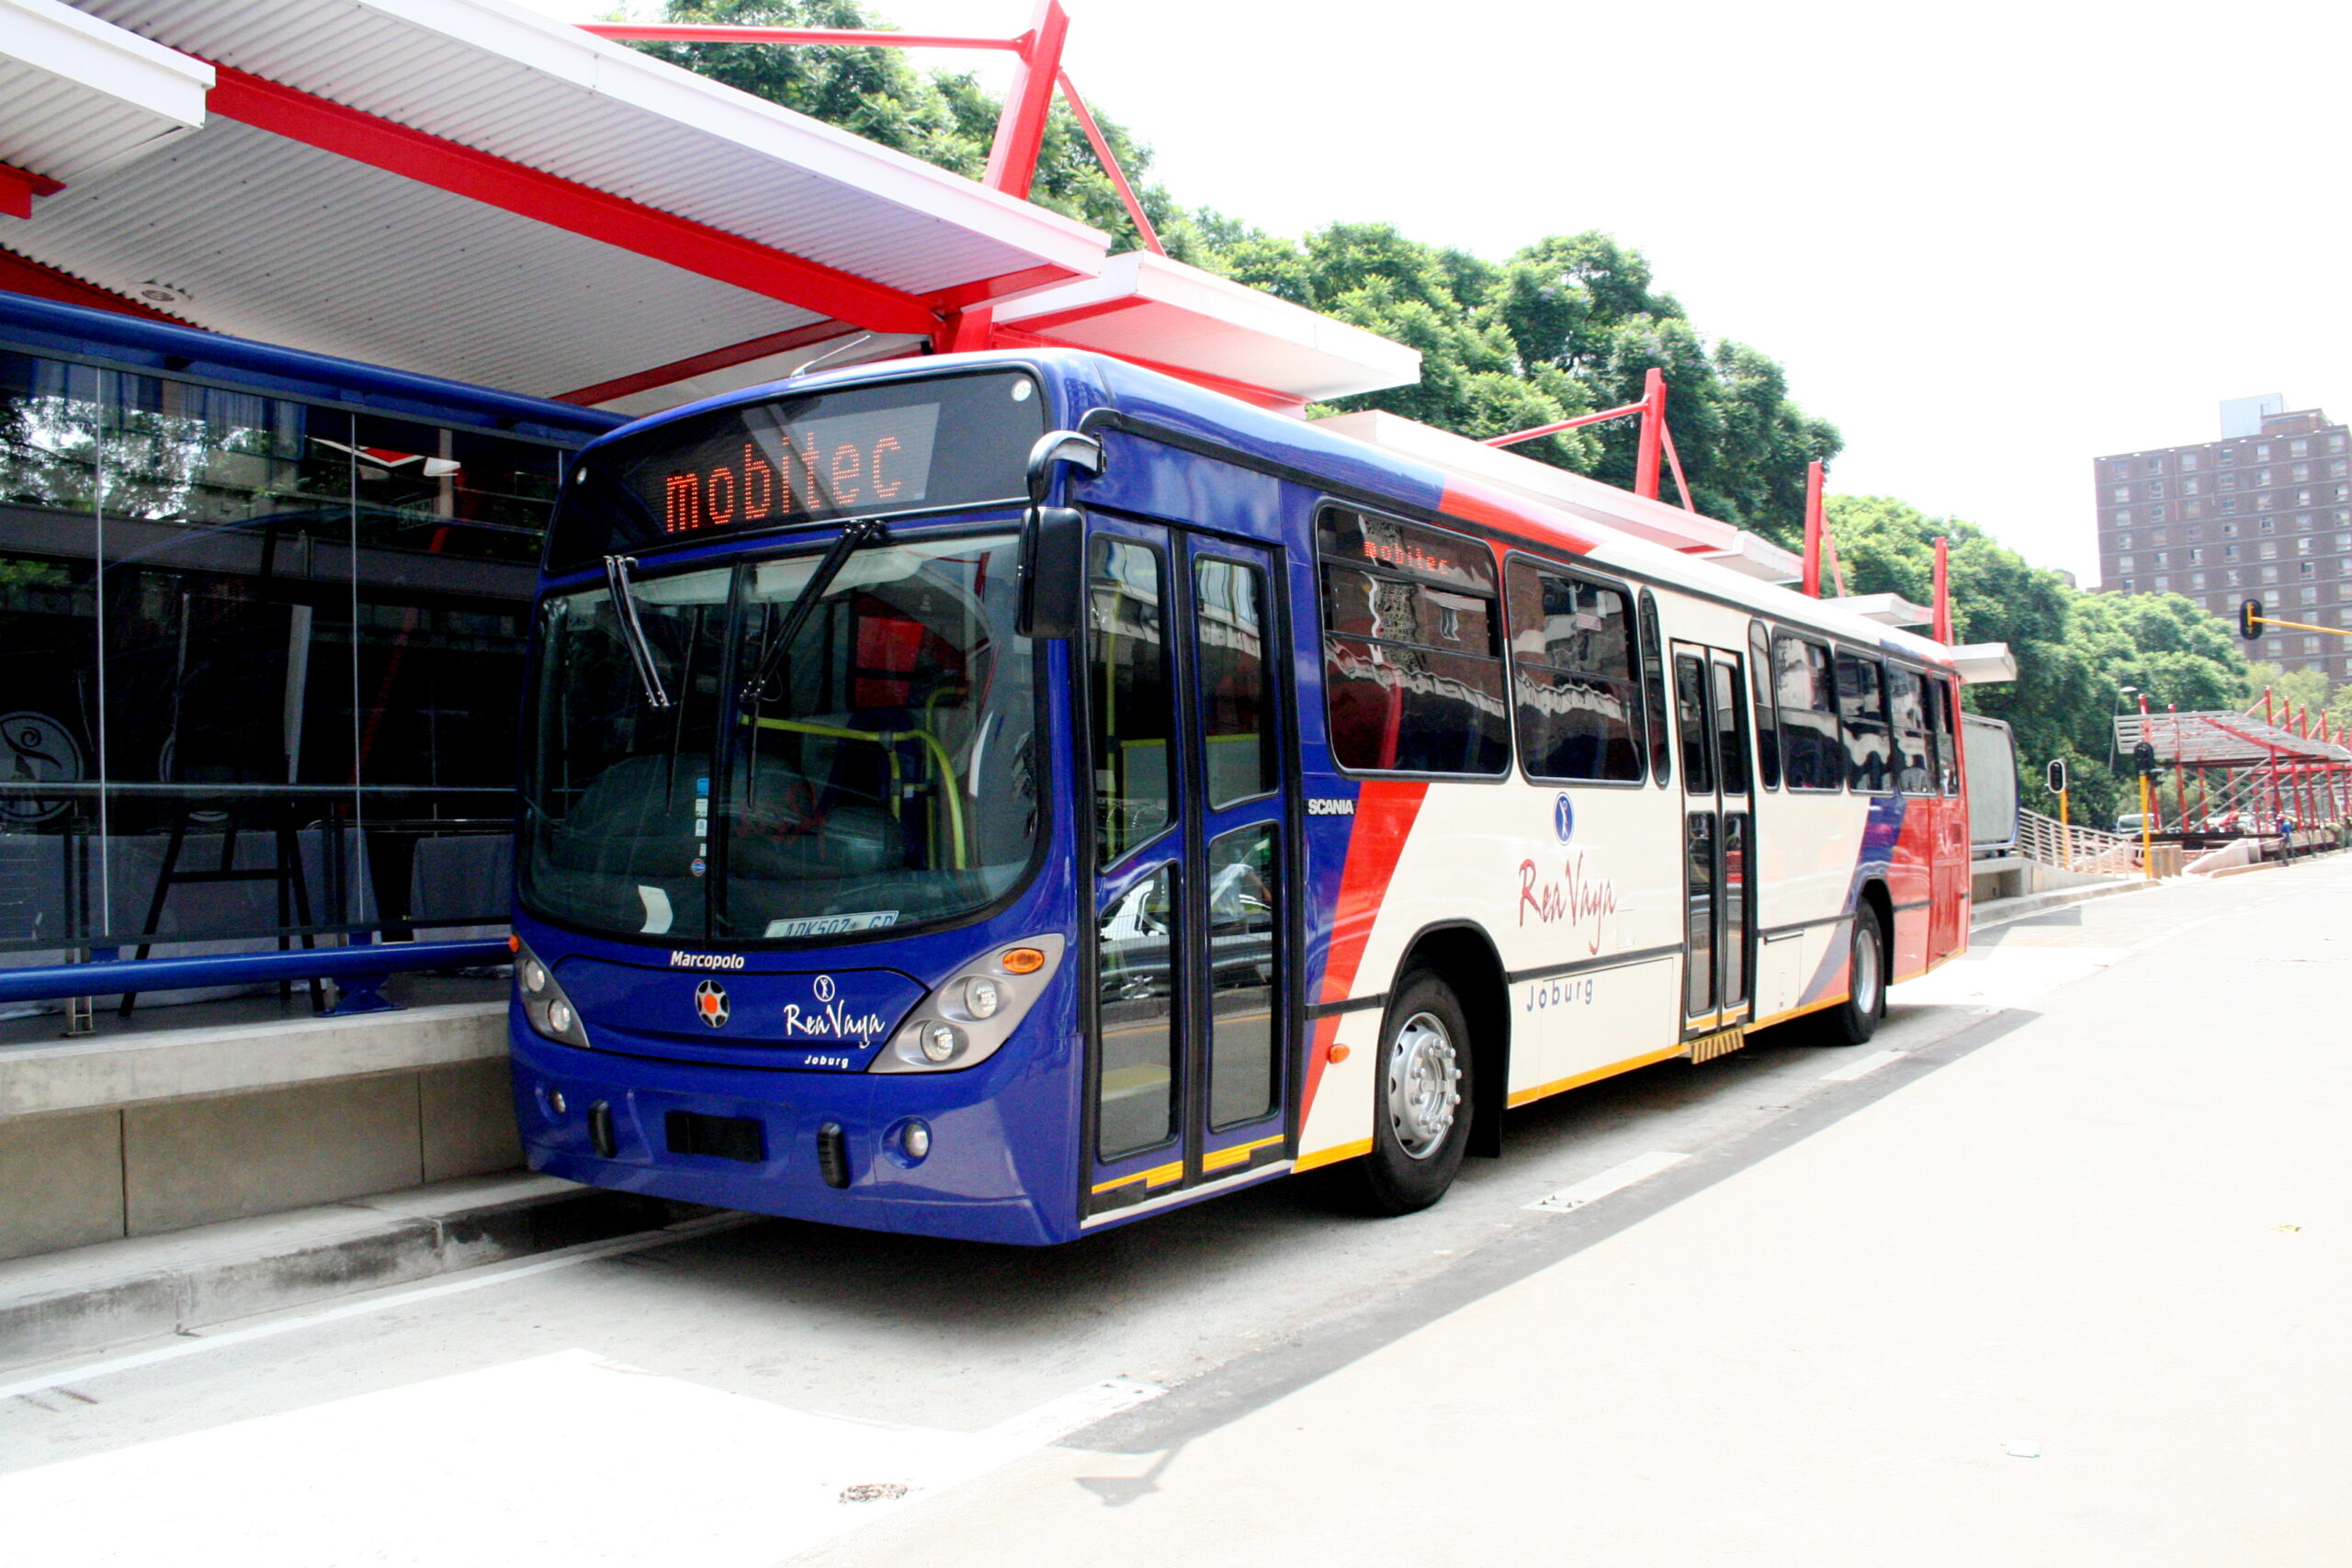 City of Joburg gives R60 million to Metrobus for new buses